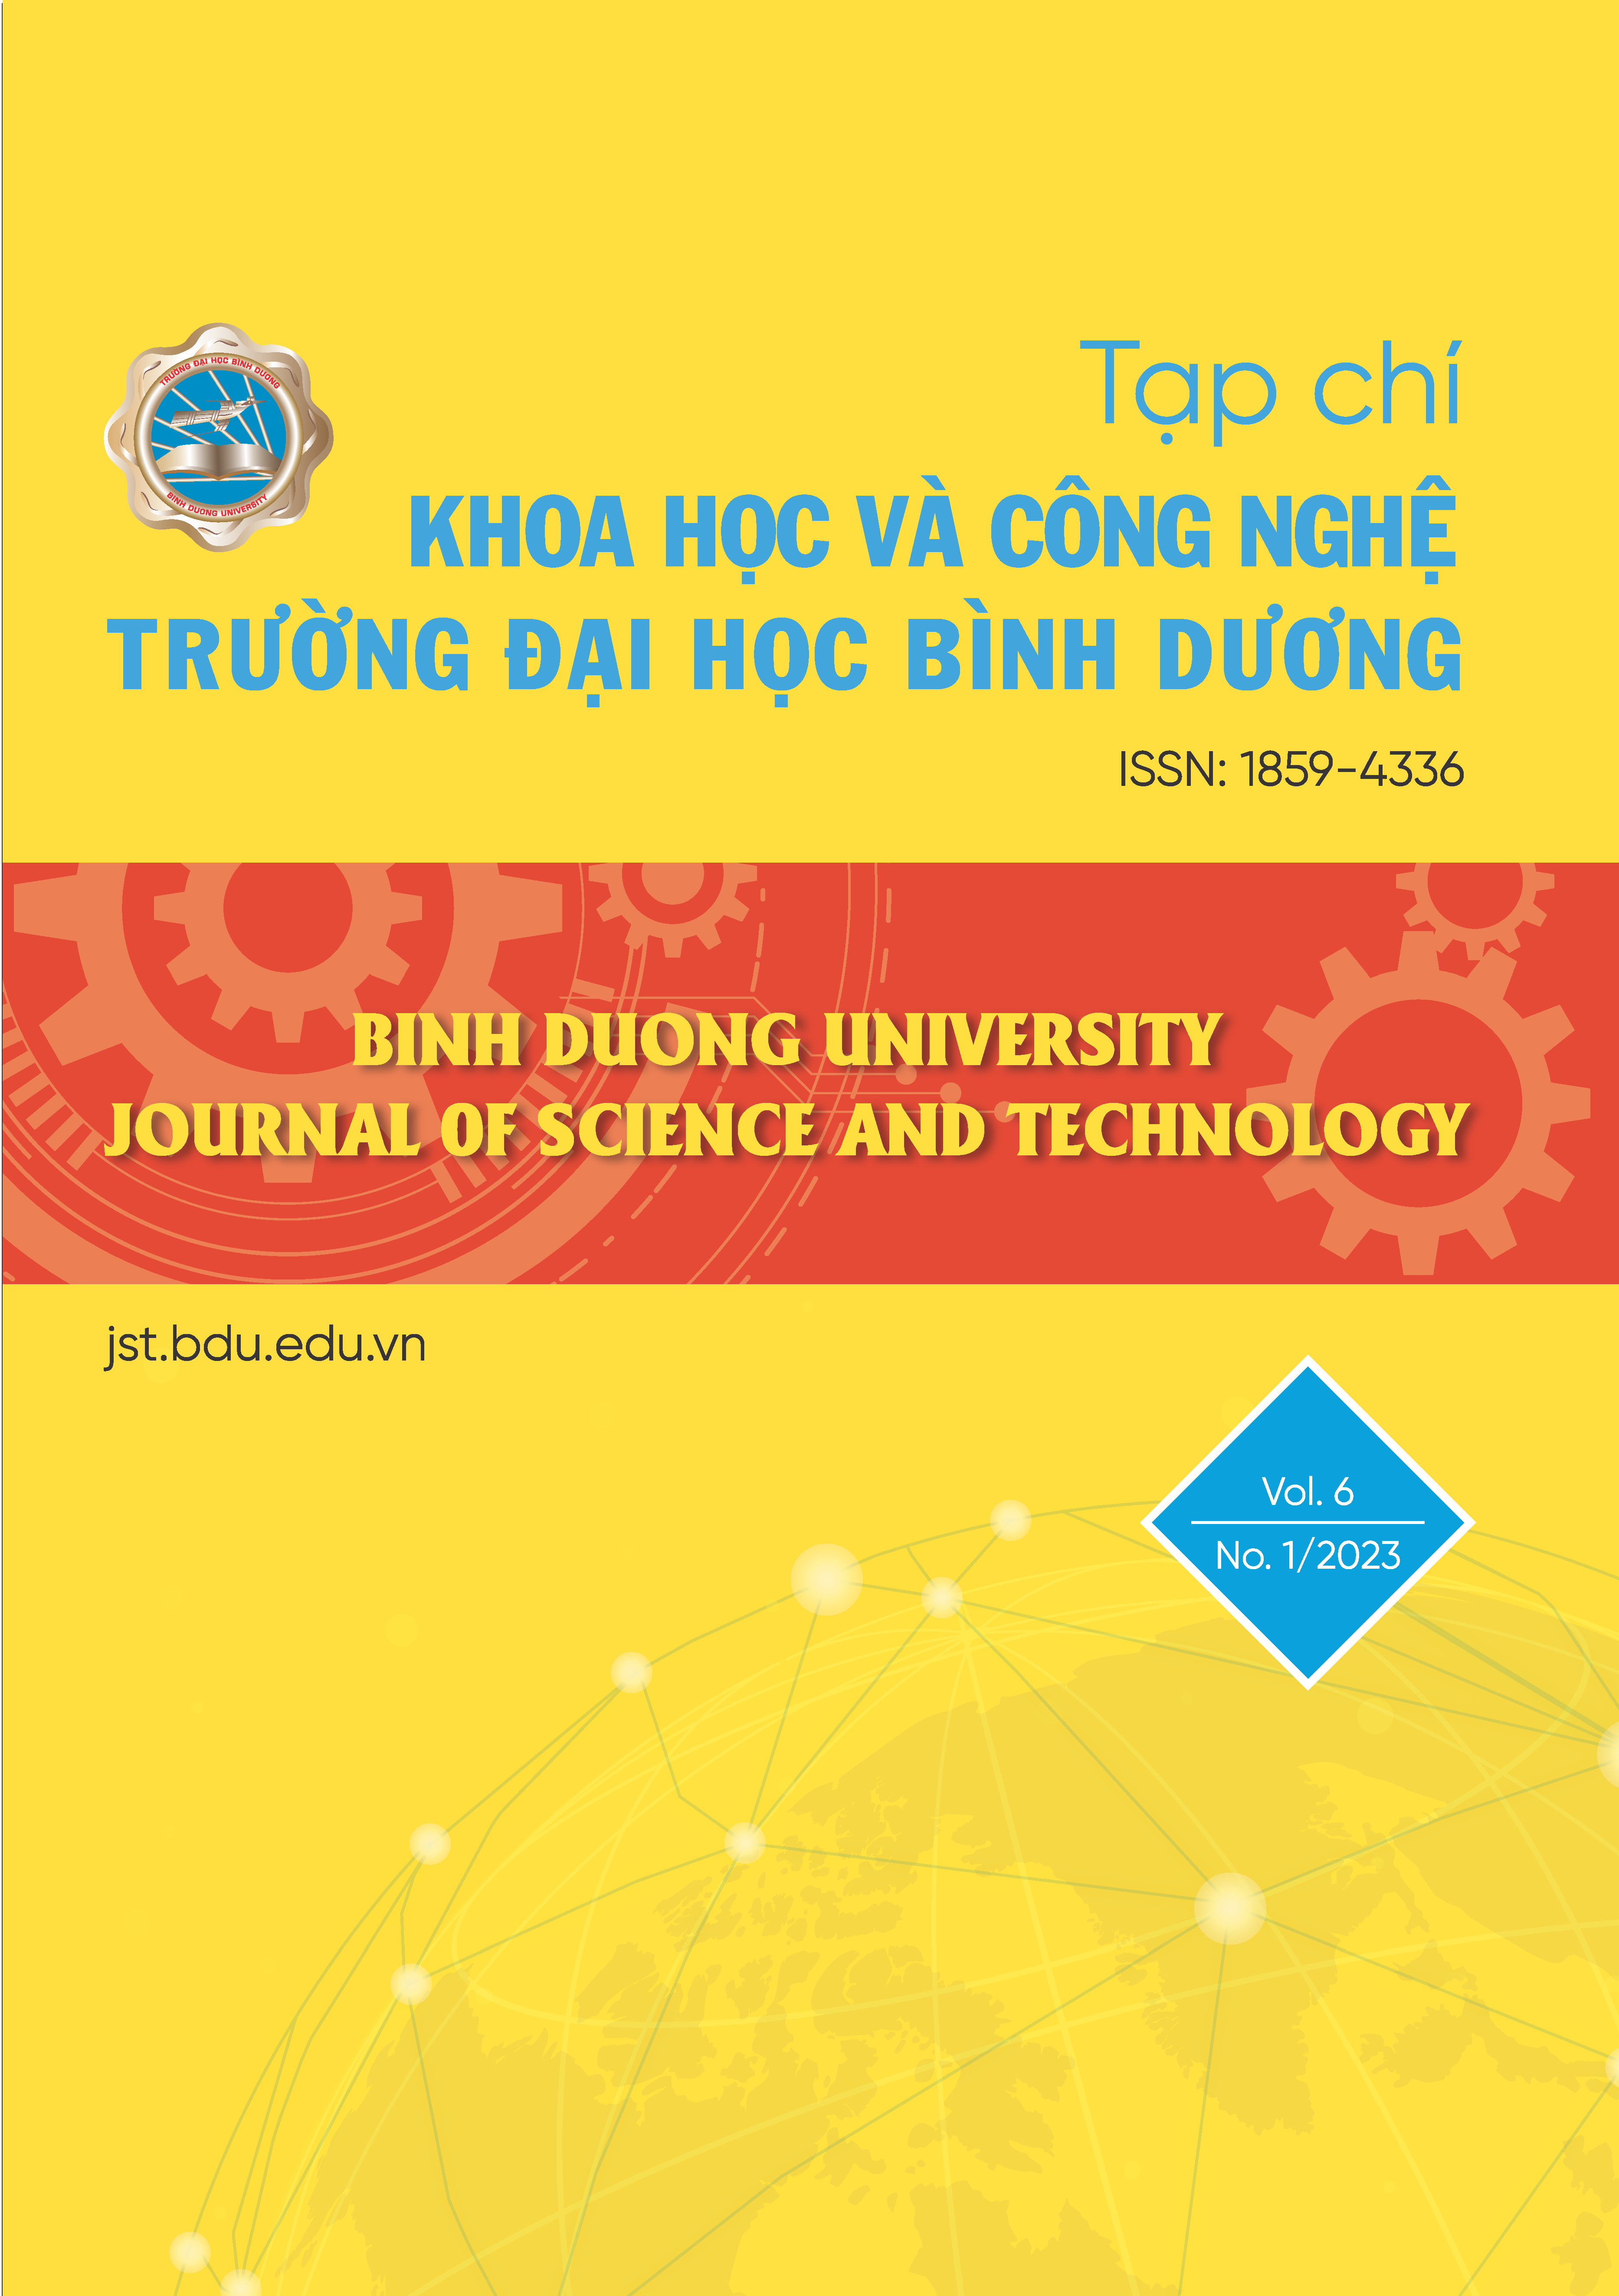 					View Vol. 6 No. 1 (2023): BINH DUONG UNIVERSITY JOURNAL OF SCIENCE AND TECHNOLOGY
				